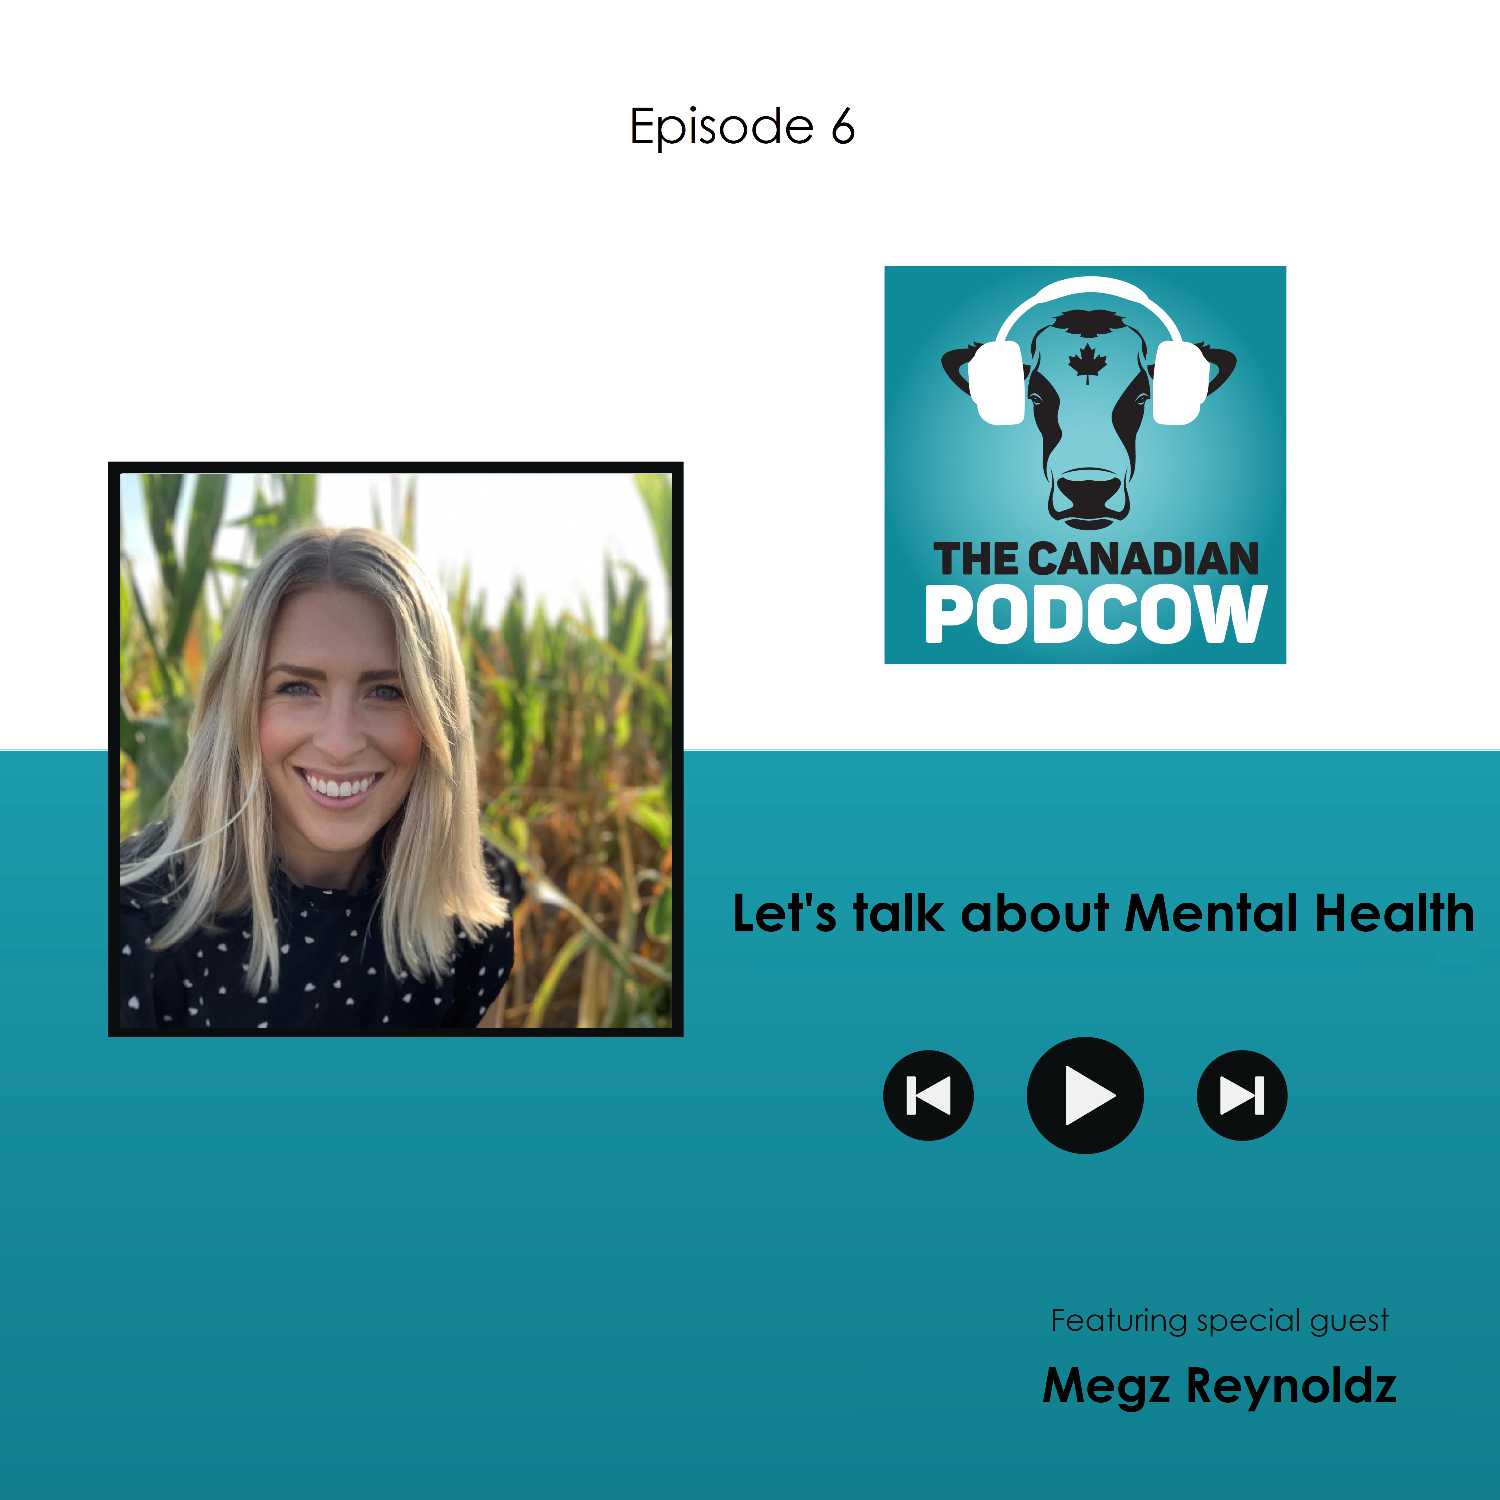 Let's talk about Mental Health